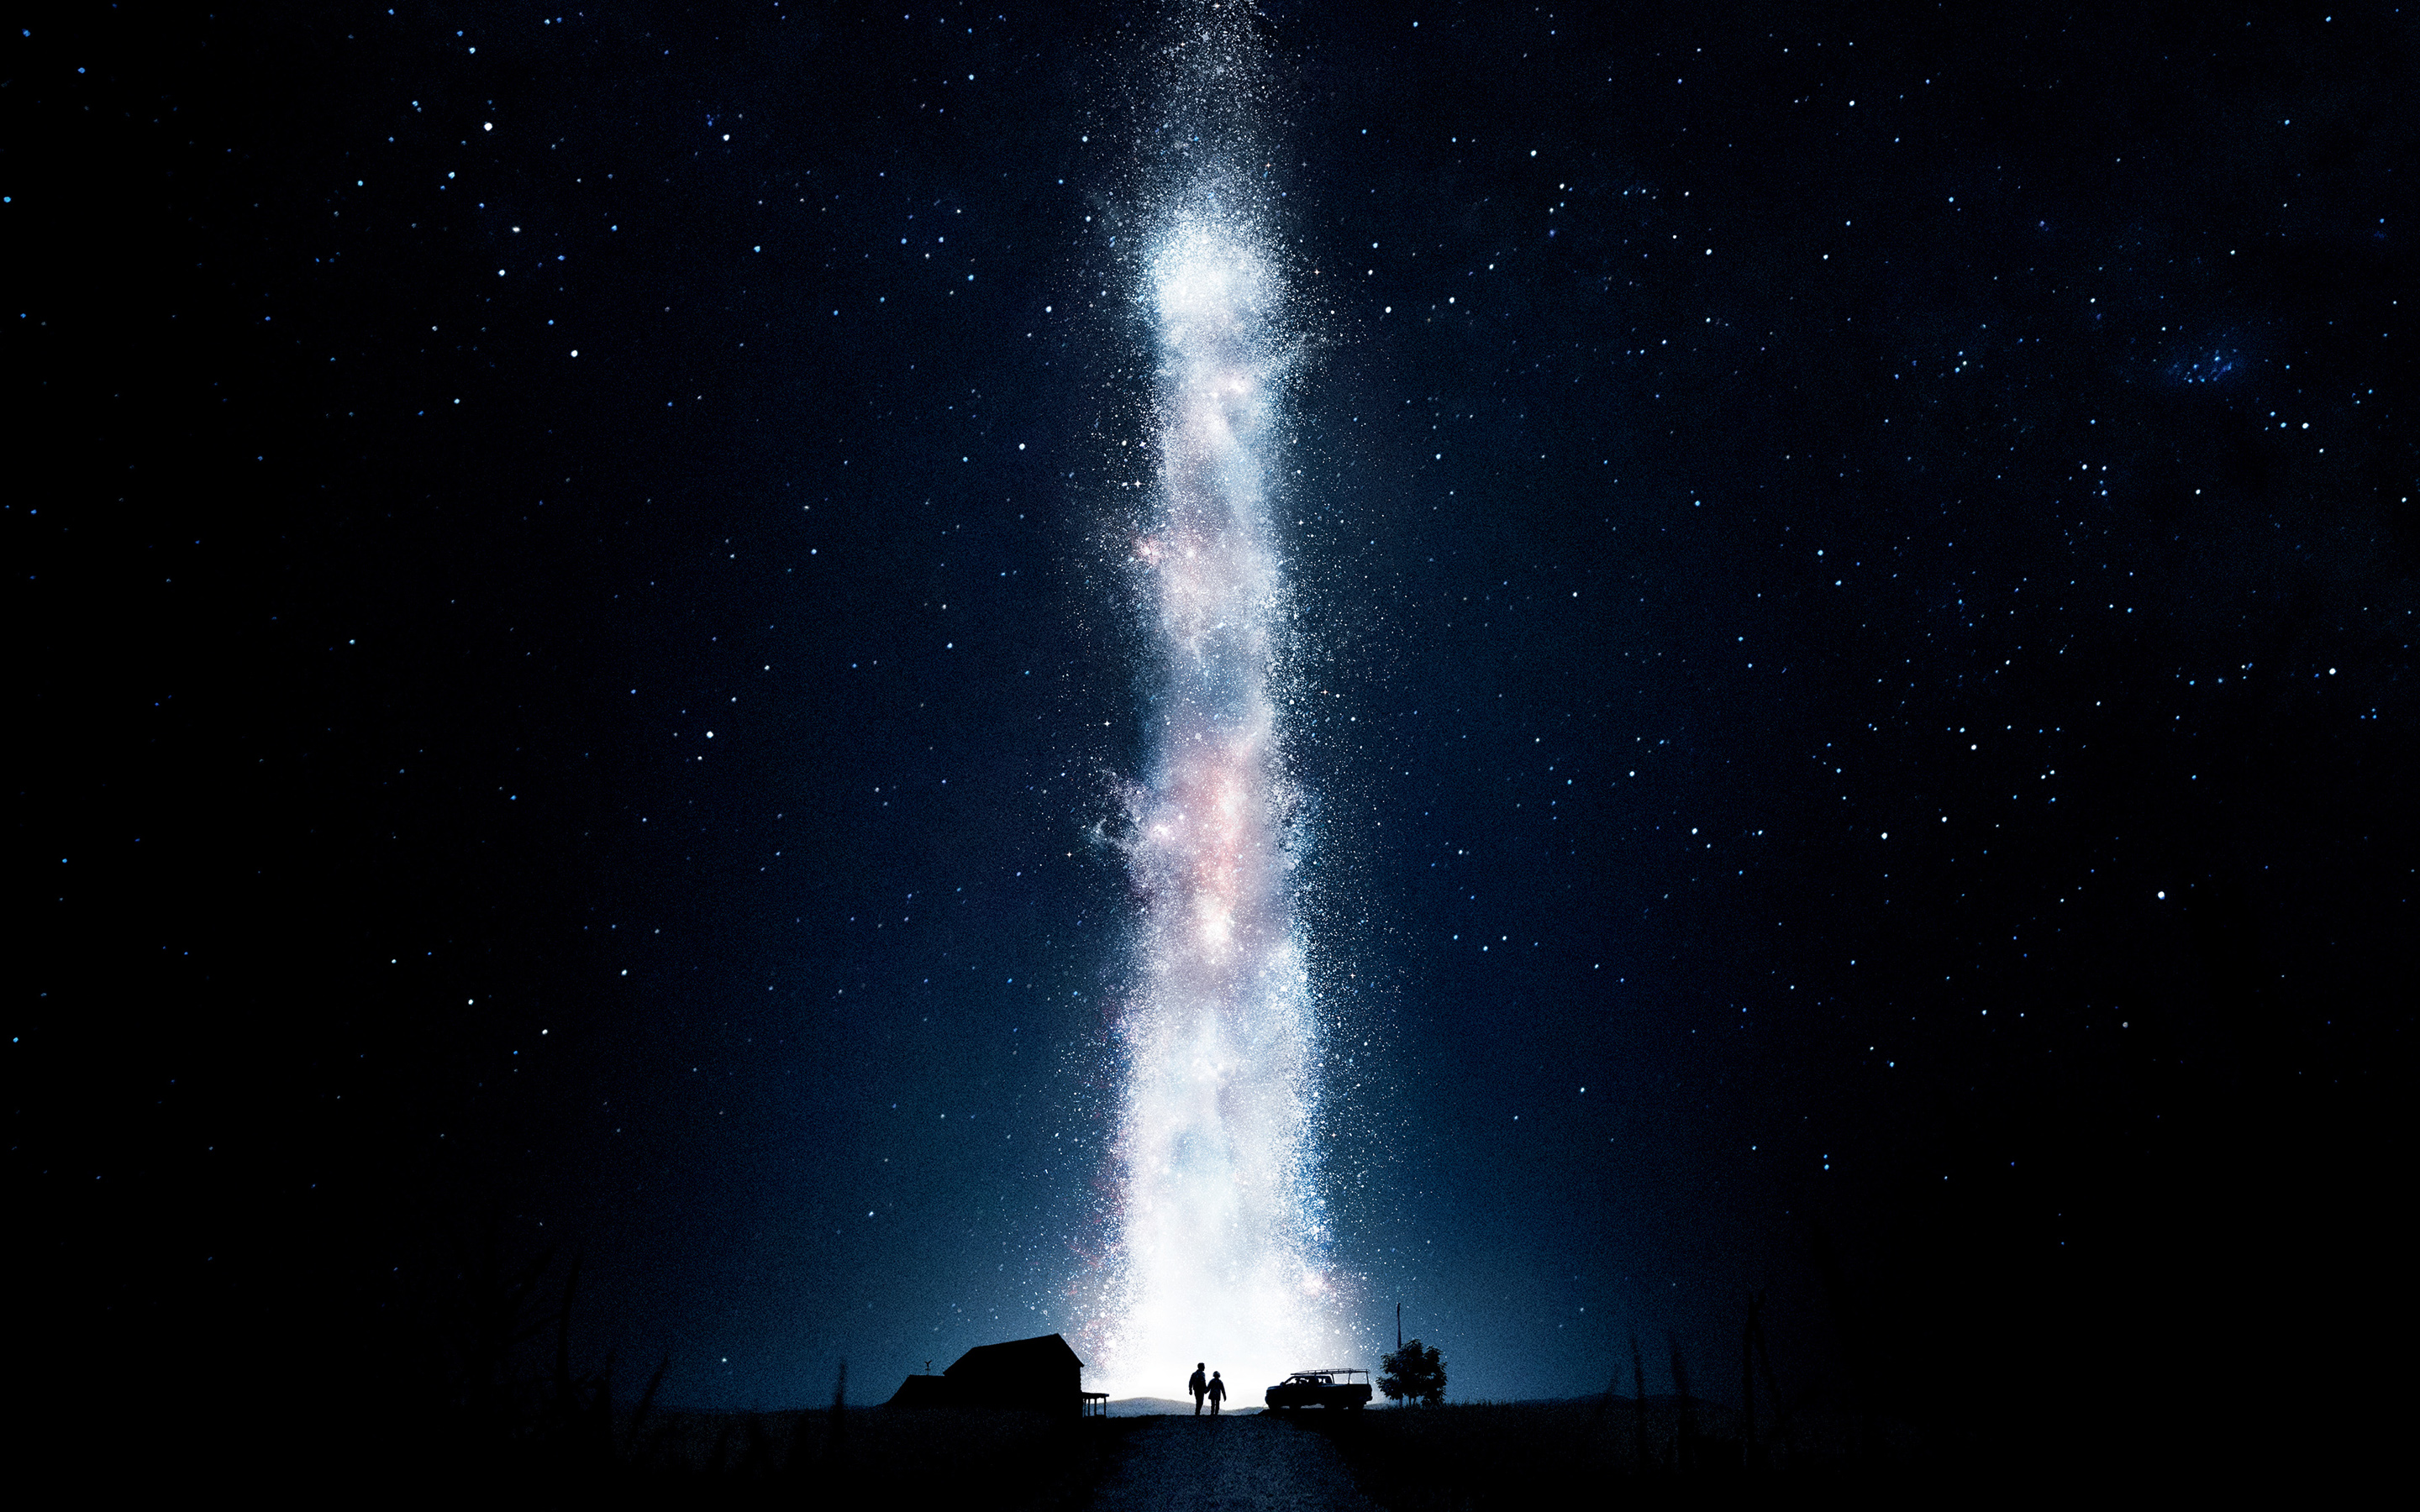 140 Interstellar HD Wallpapers and Backgrounds